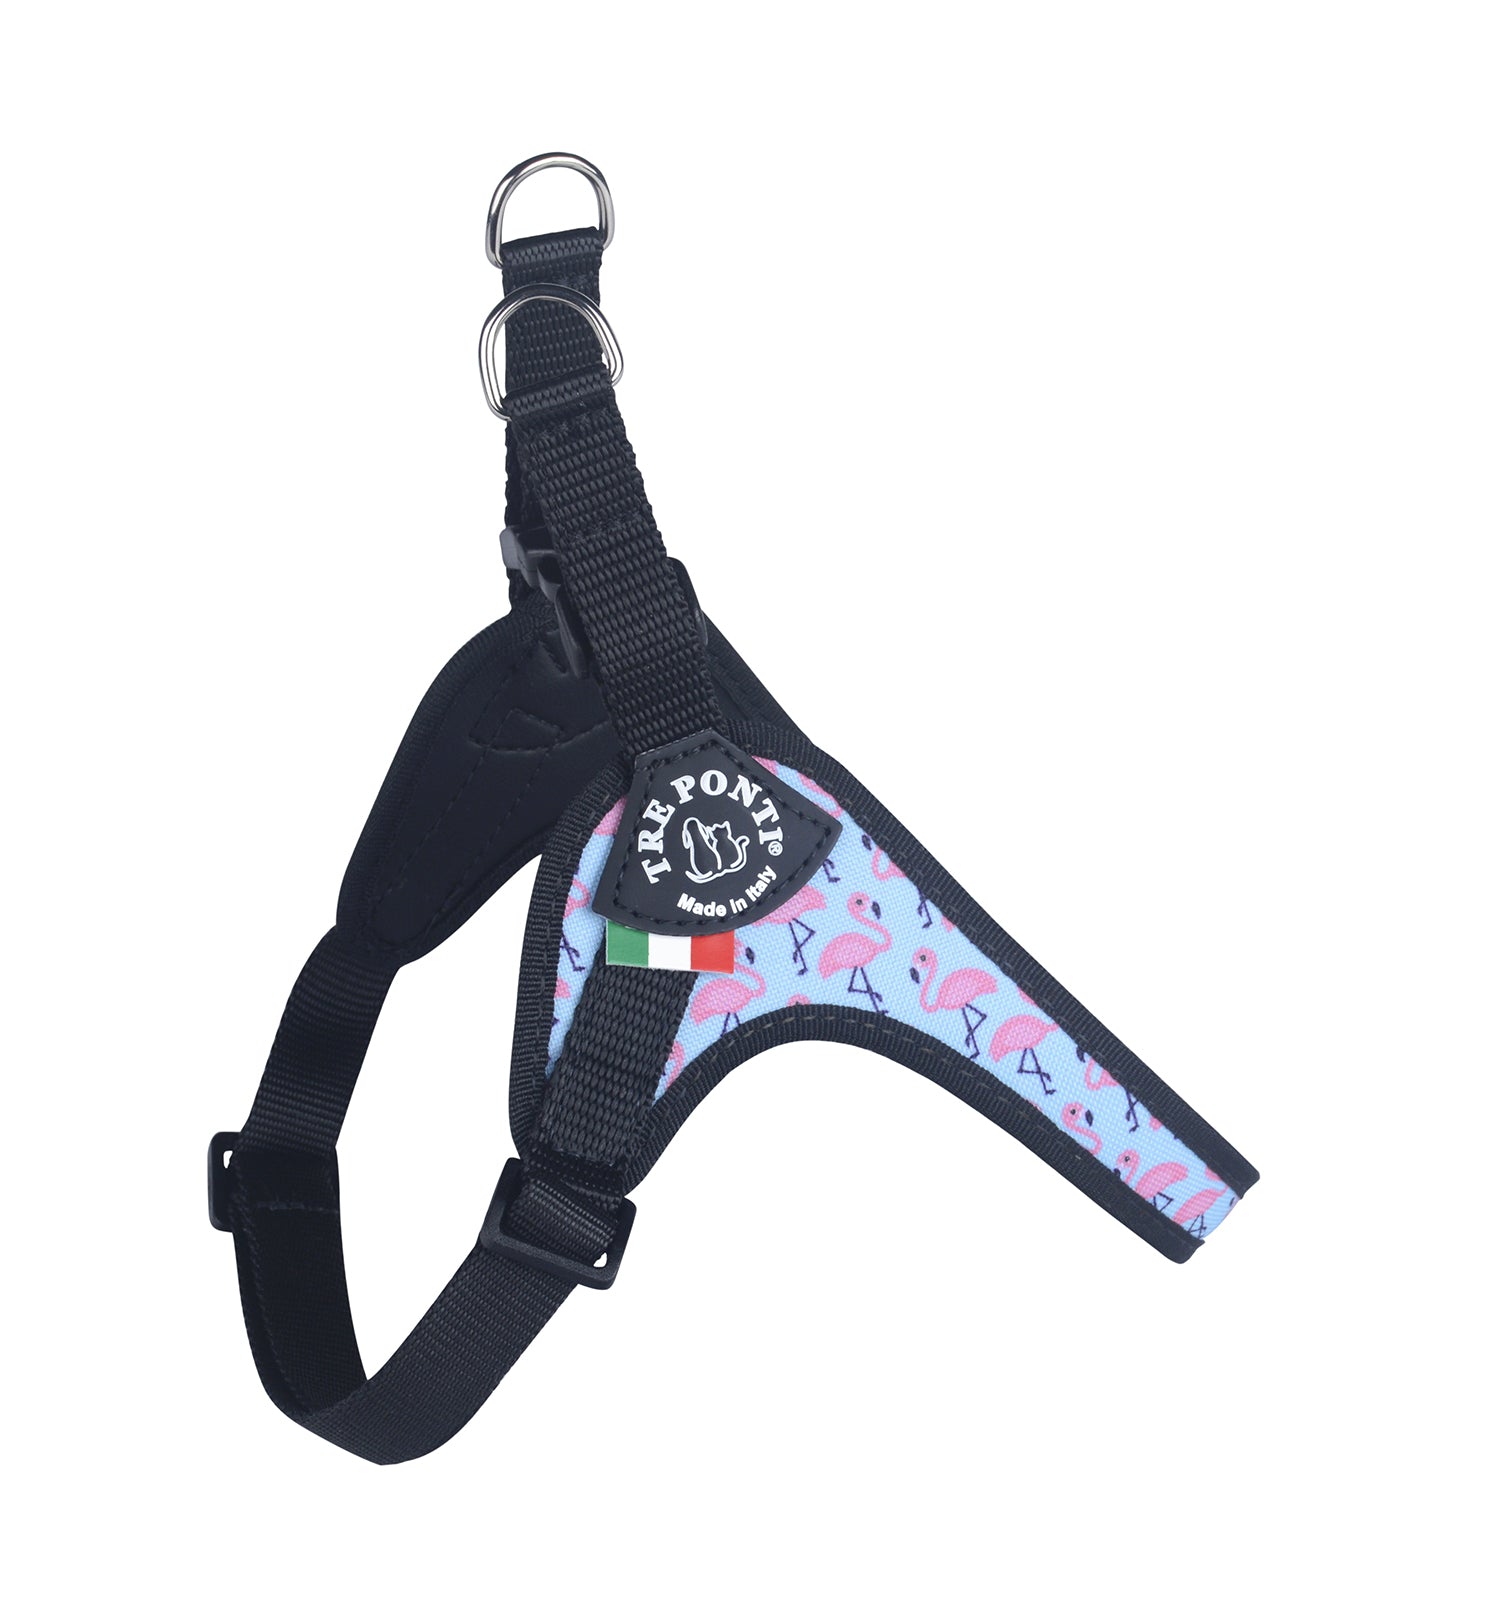 Easy Fit Classic Flamingo Harness with Adjustable Girth